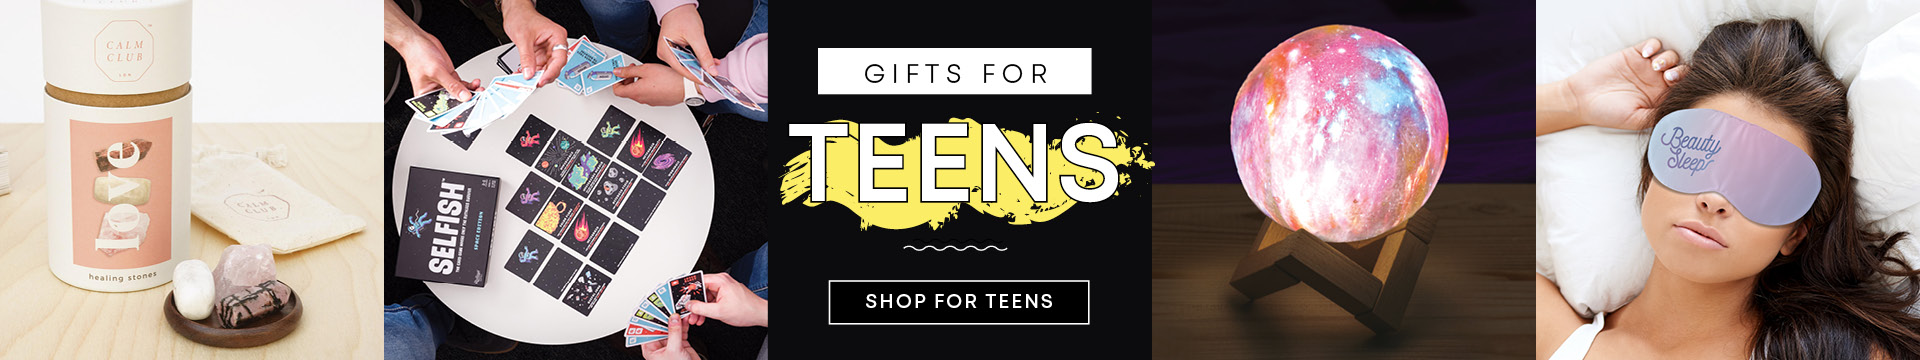 Top Gifts for Teens